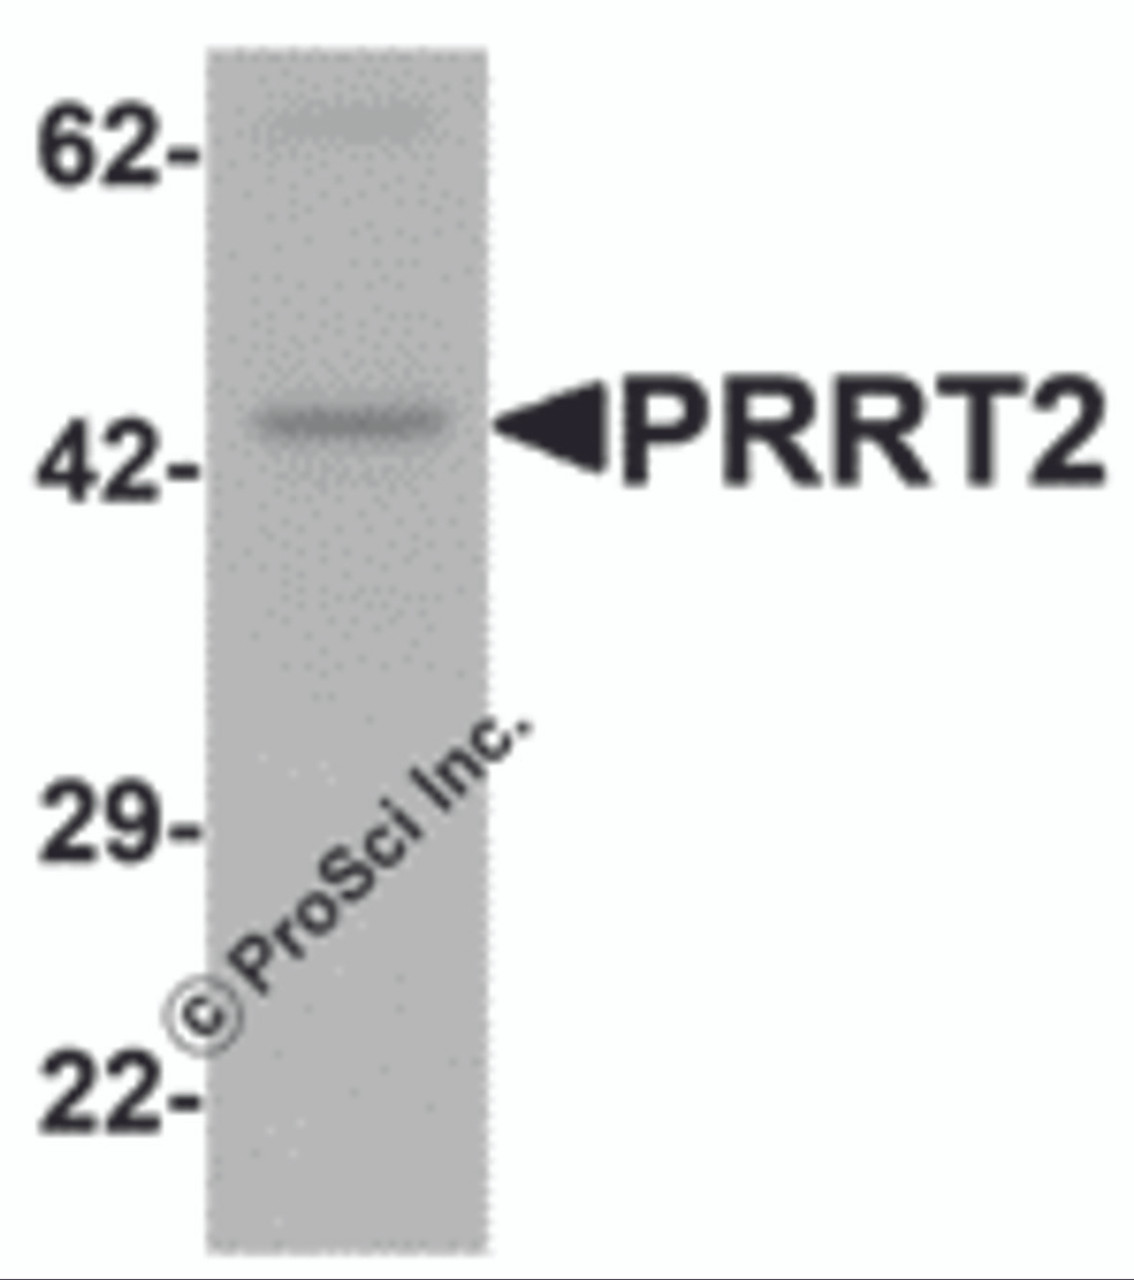 Western blot analysis of PRRT2 in mouse brain tissue lysate with PRRT2 antibody at 1 &#956;g/mL.